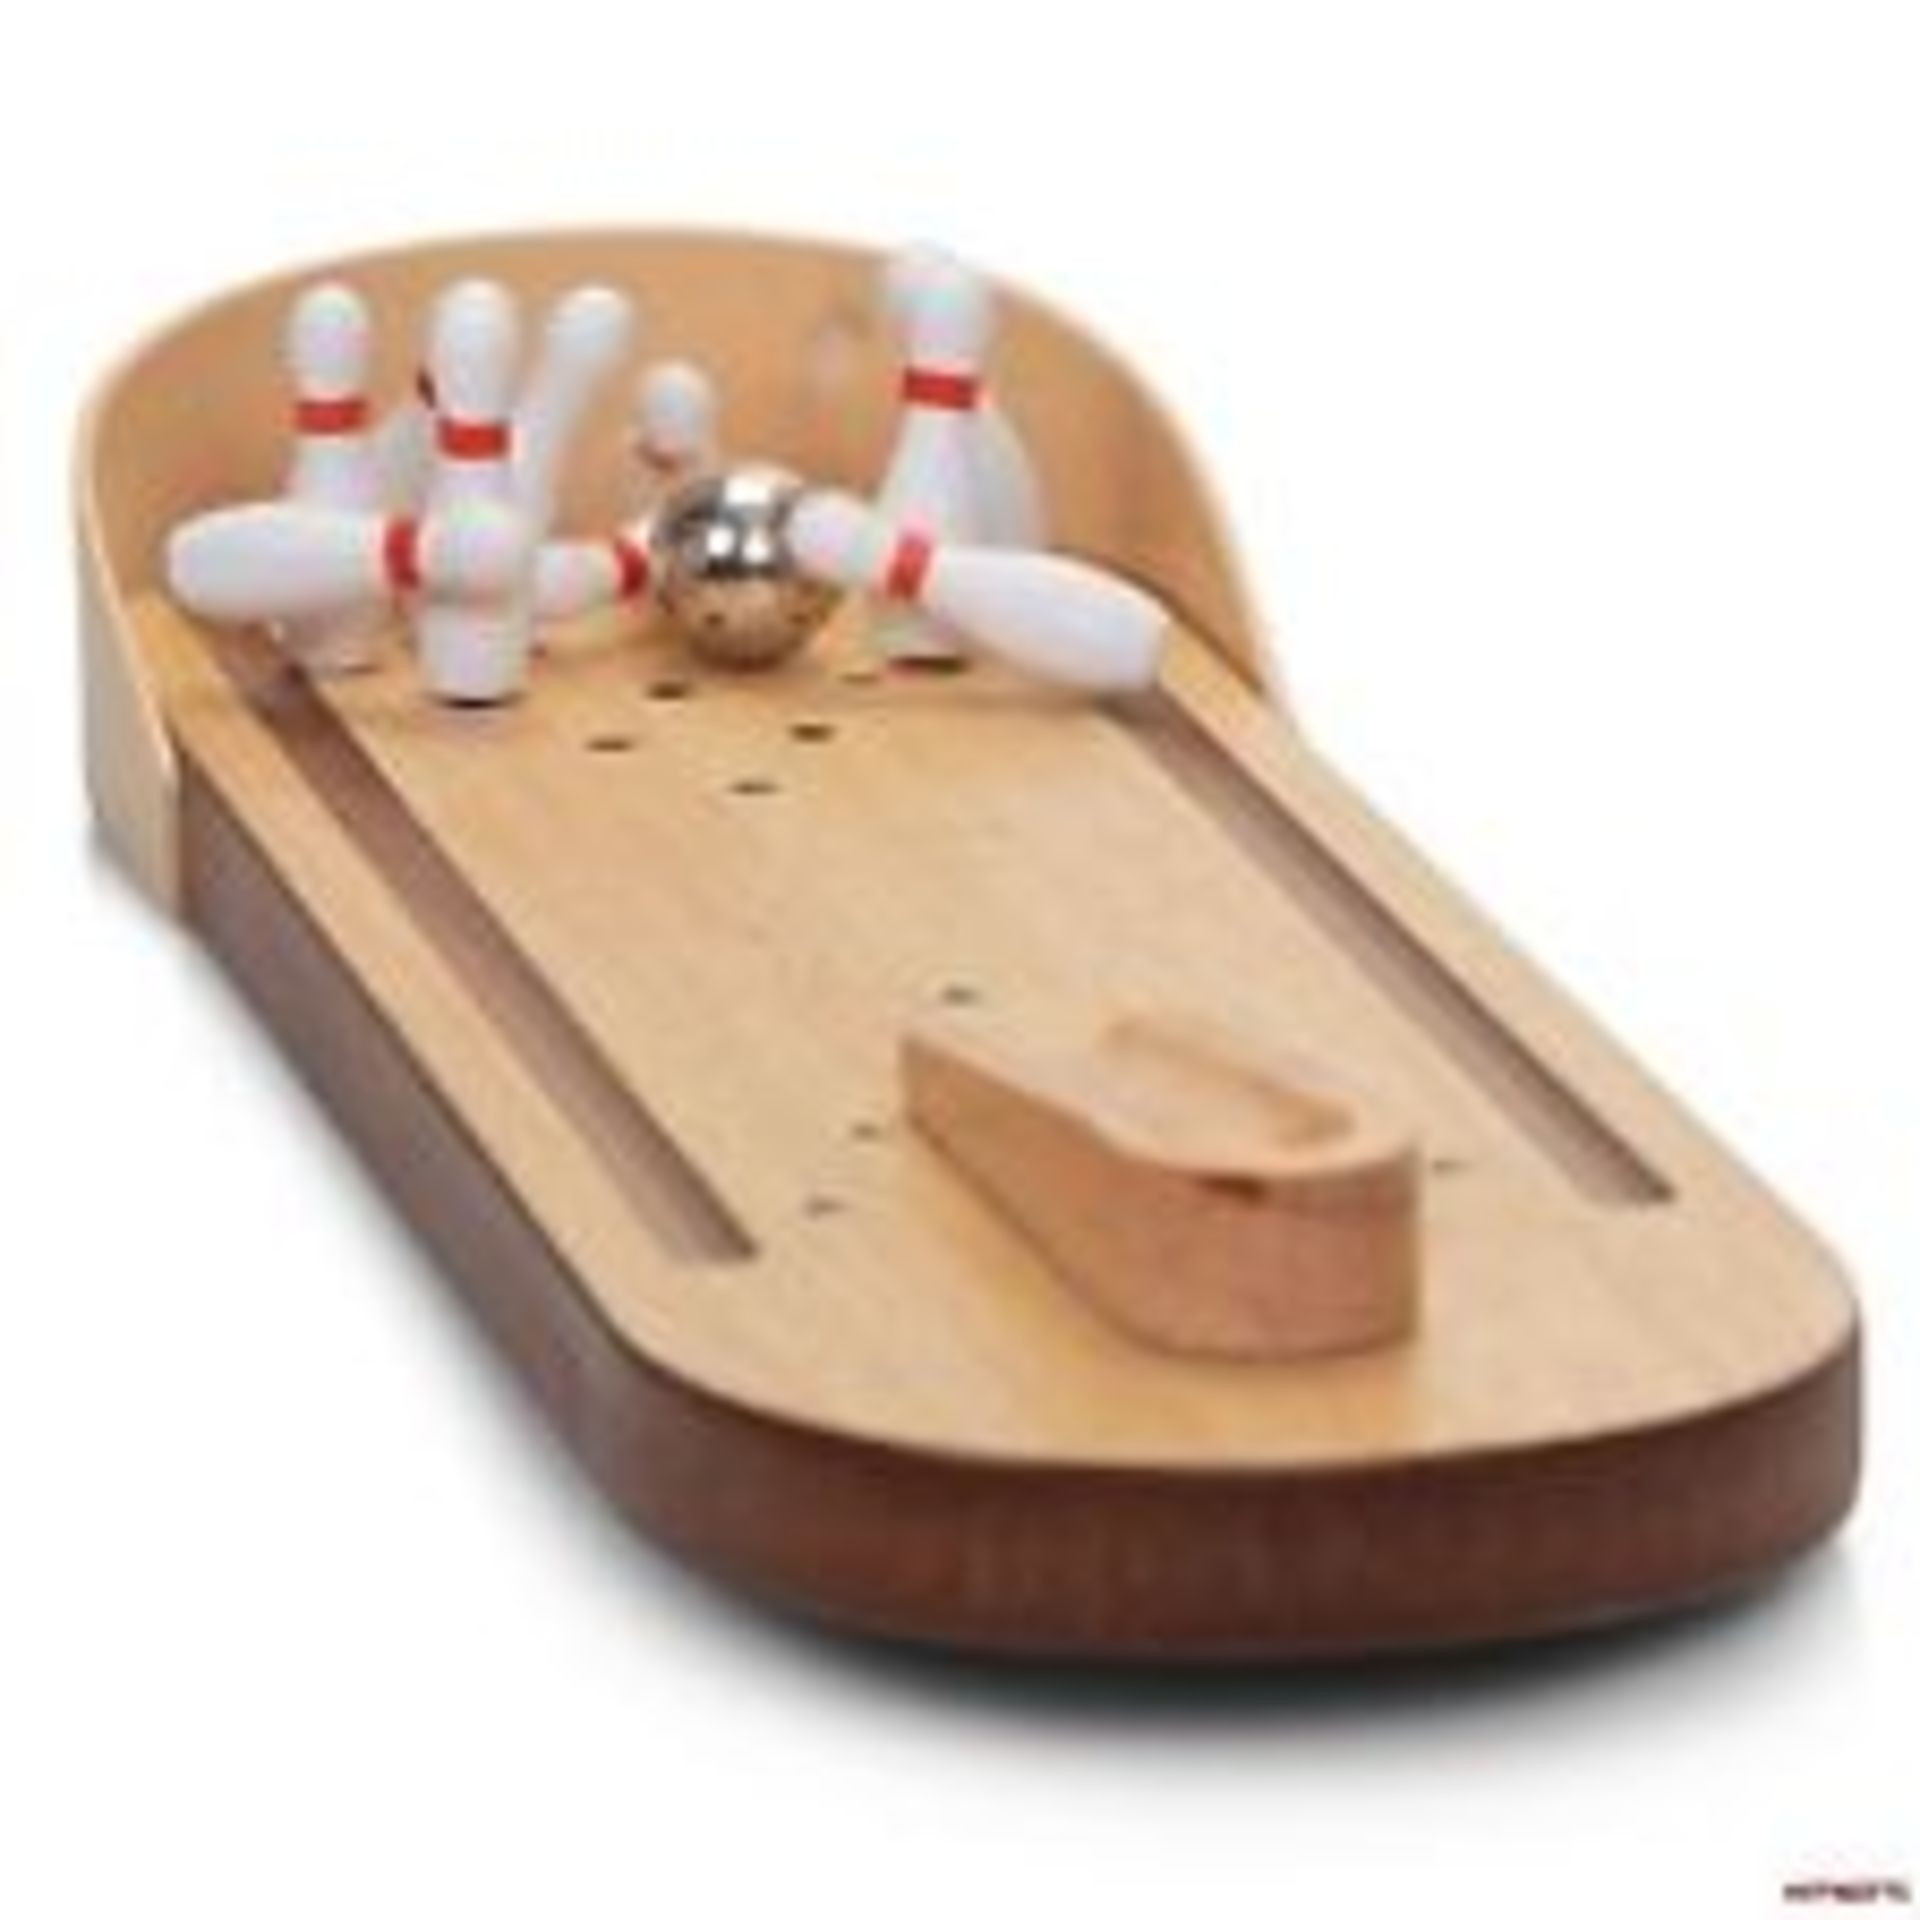 V *TRADE QTY* Brand New Ten Pin Bowling Alley Game X 3 YOUR BID PRICE TO BE MULTIPLIED BY THREE